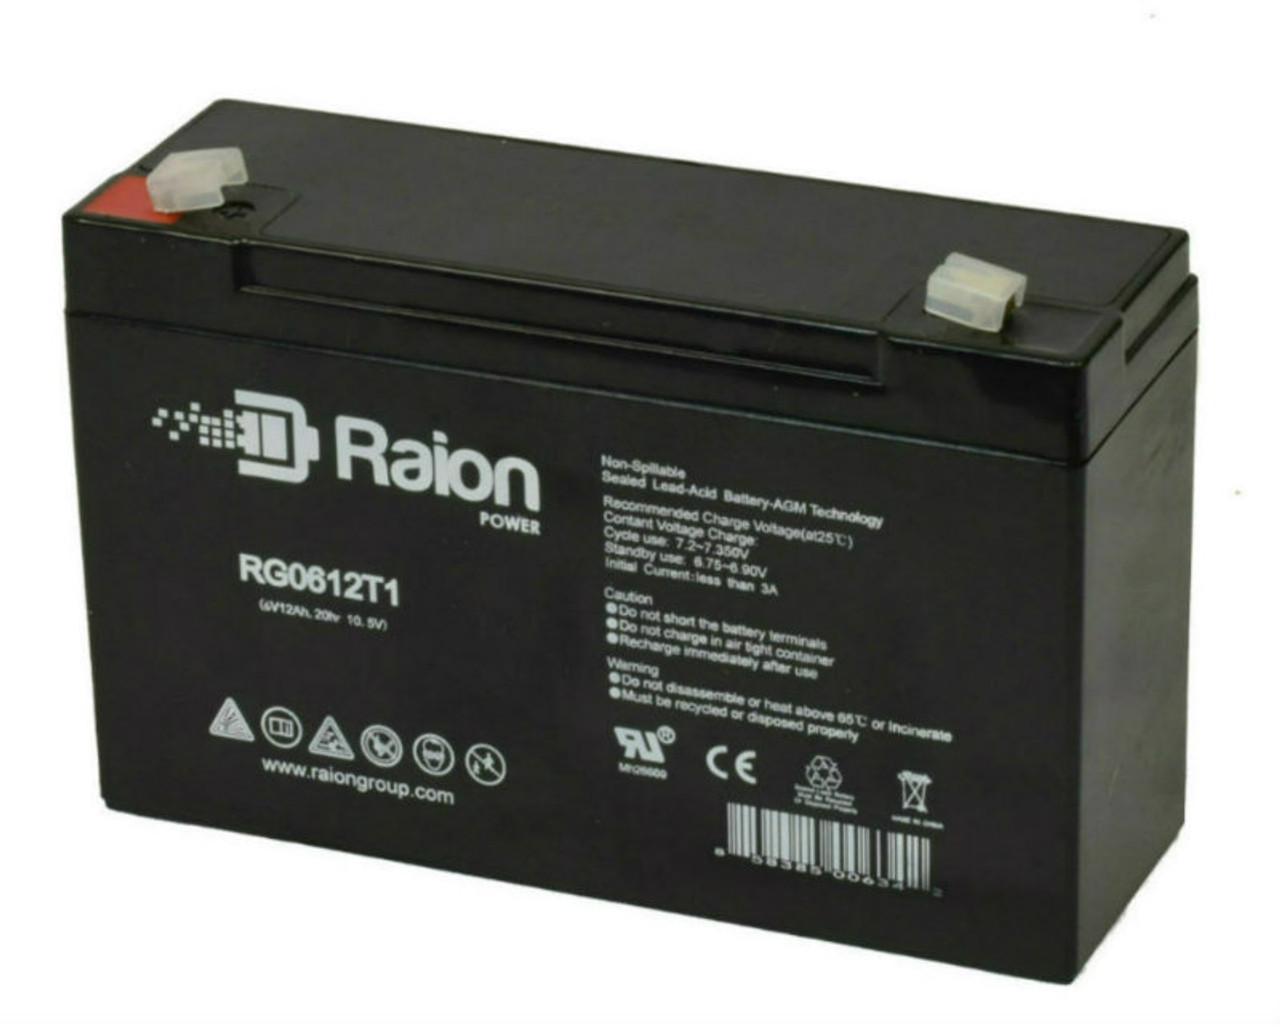 Raion Power RG06120T1 Replacement Battery for Power Kingdom PS10-6-F2